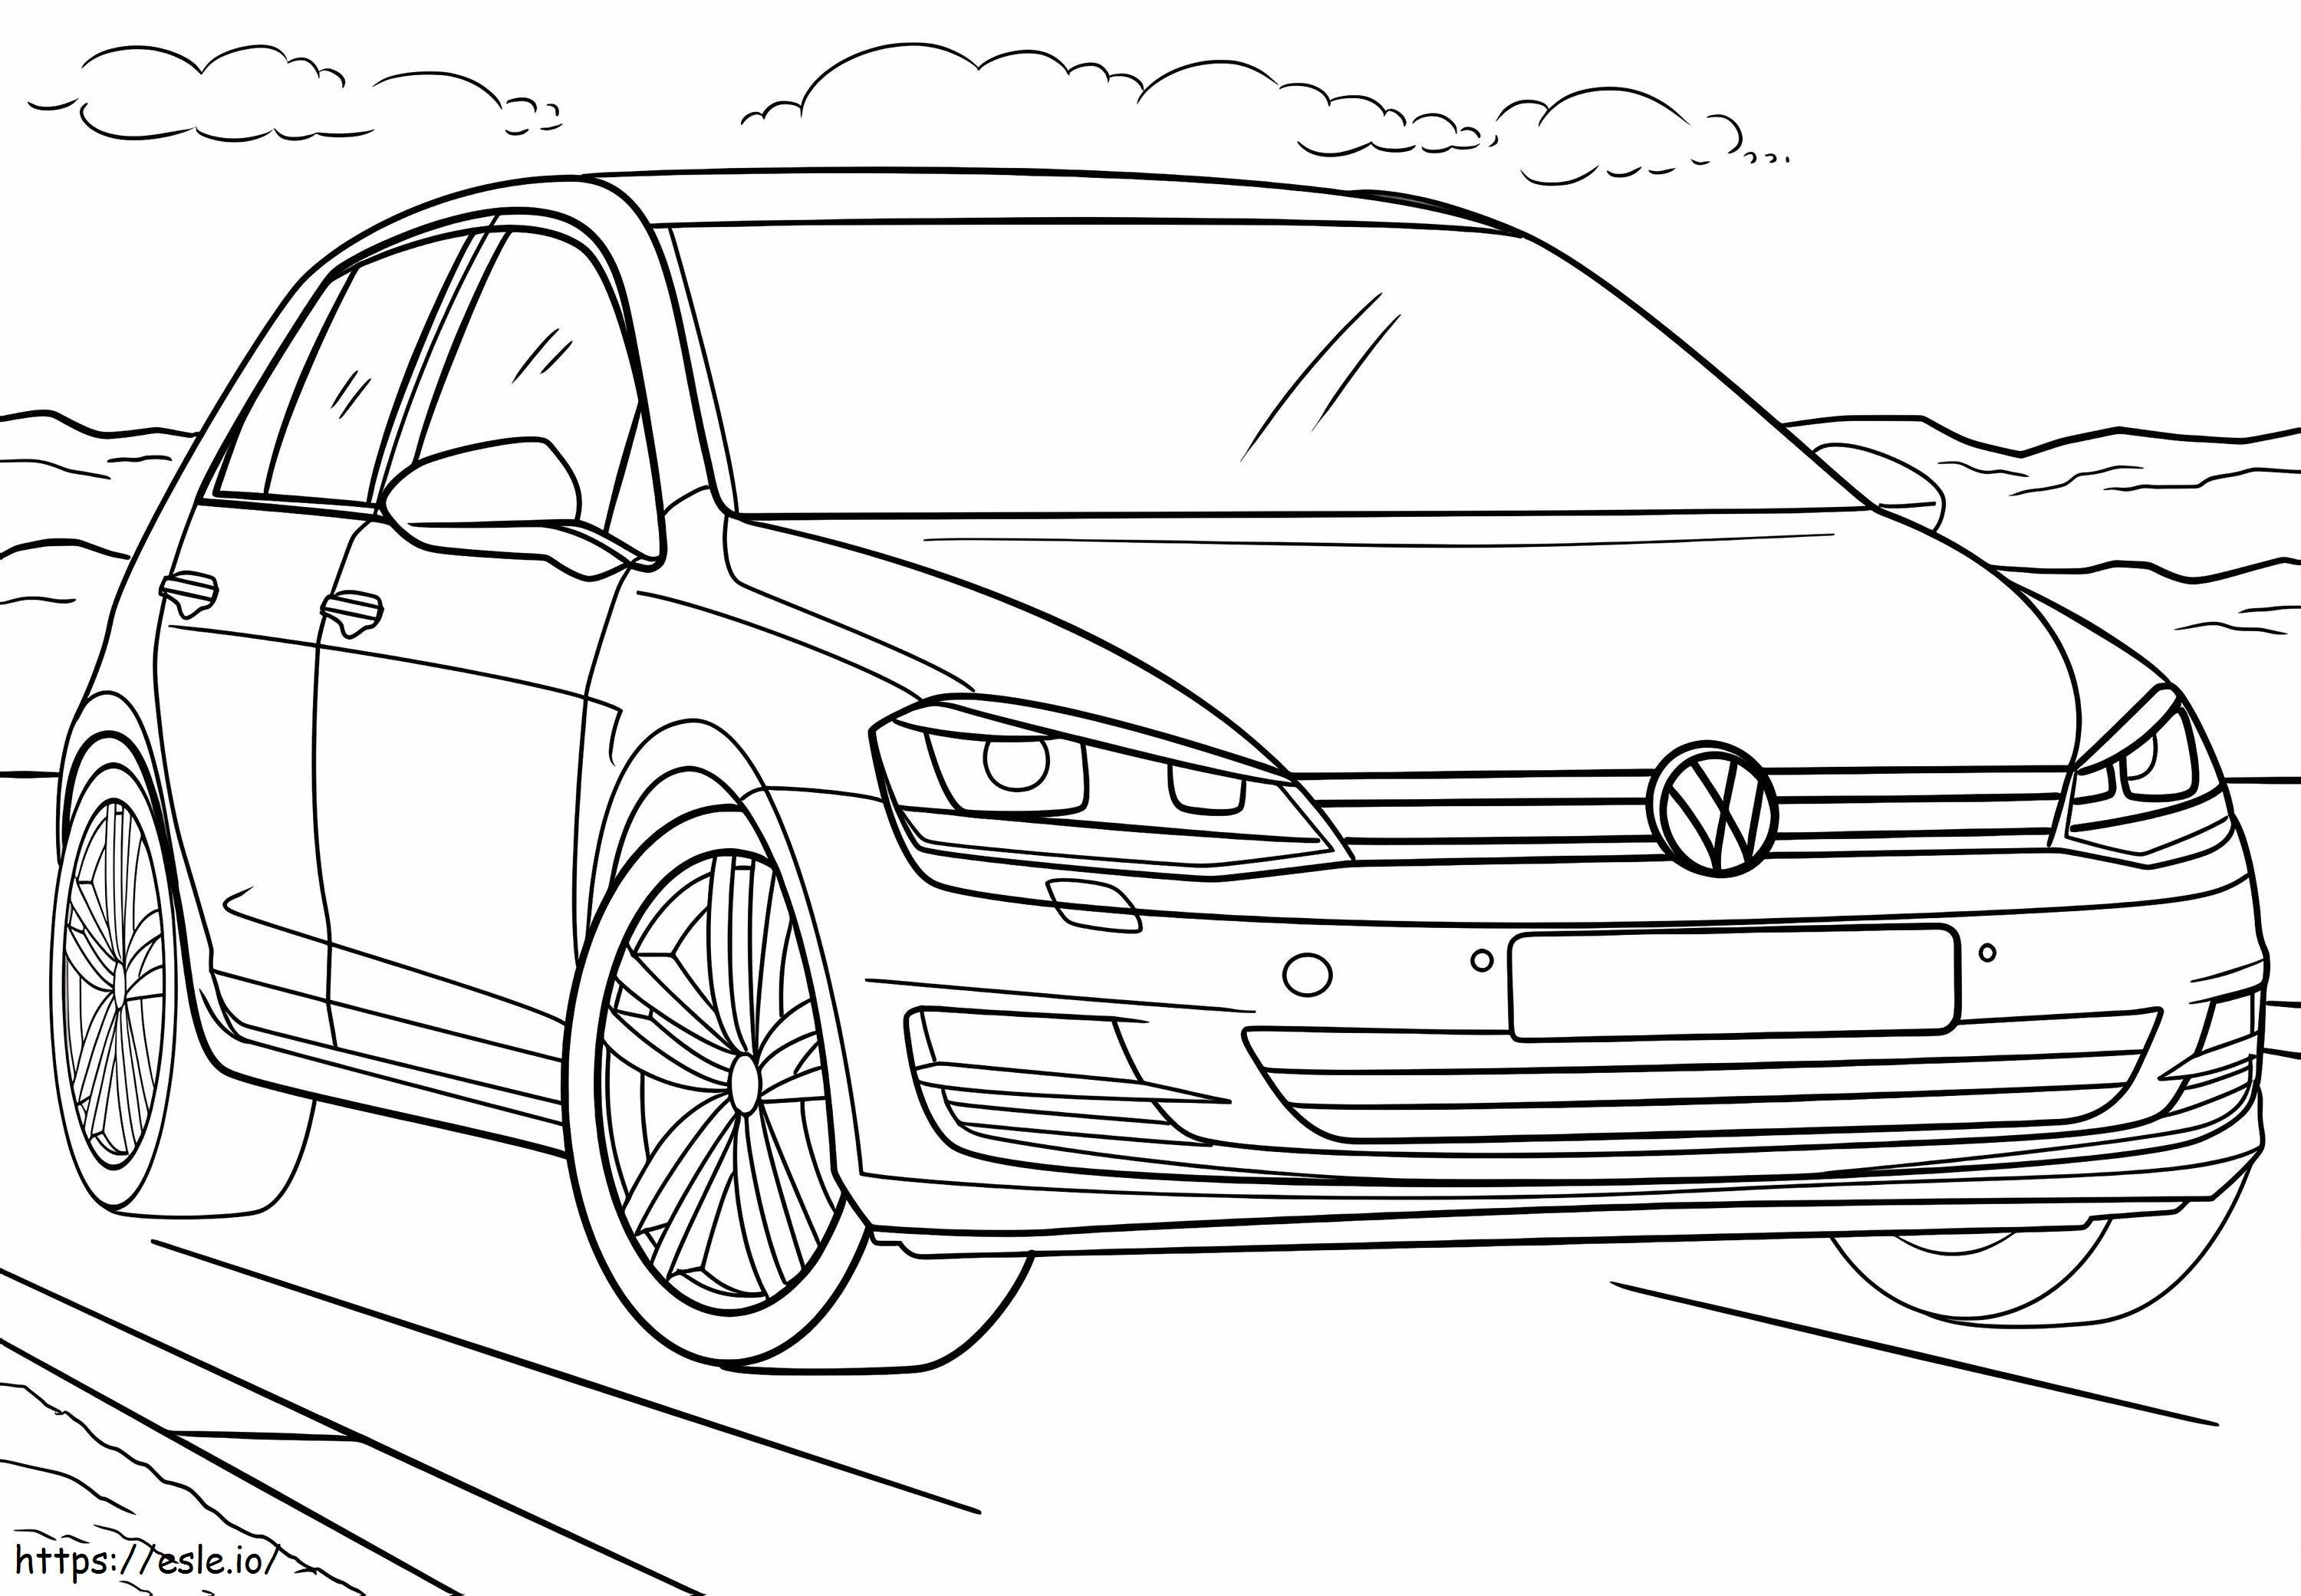 Volkswagen Golf E1637574283362 coloring page